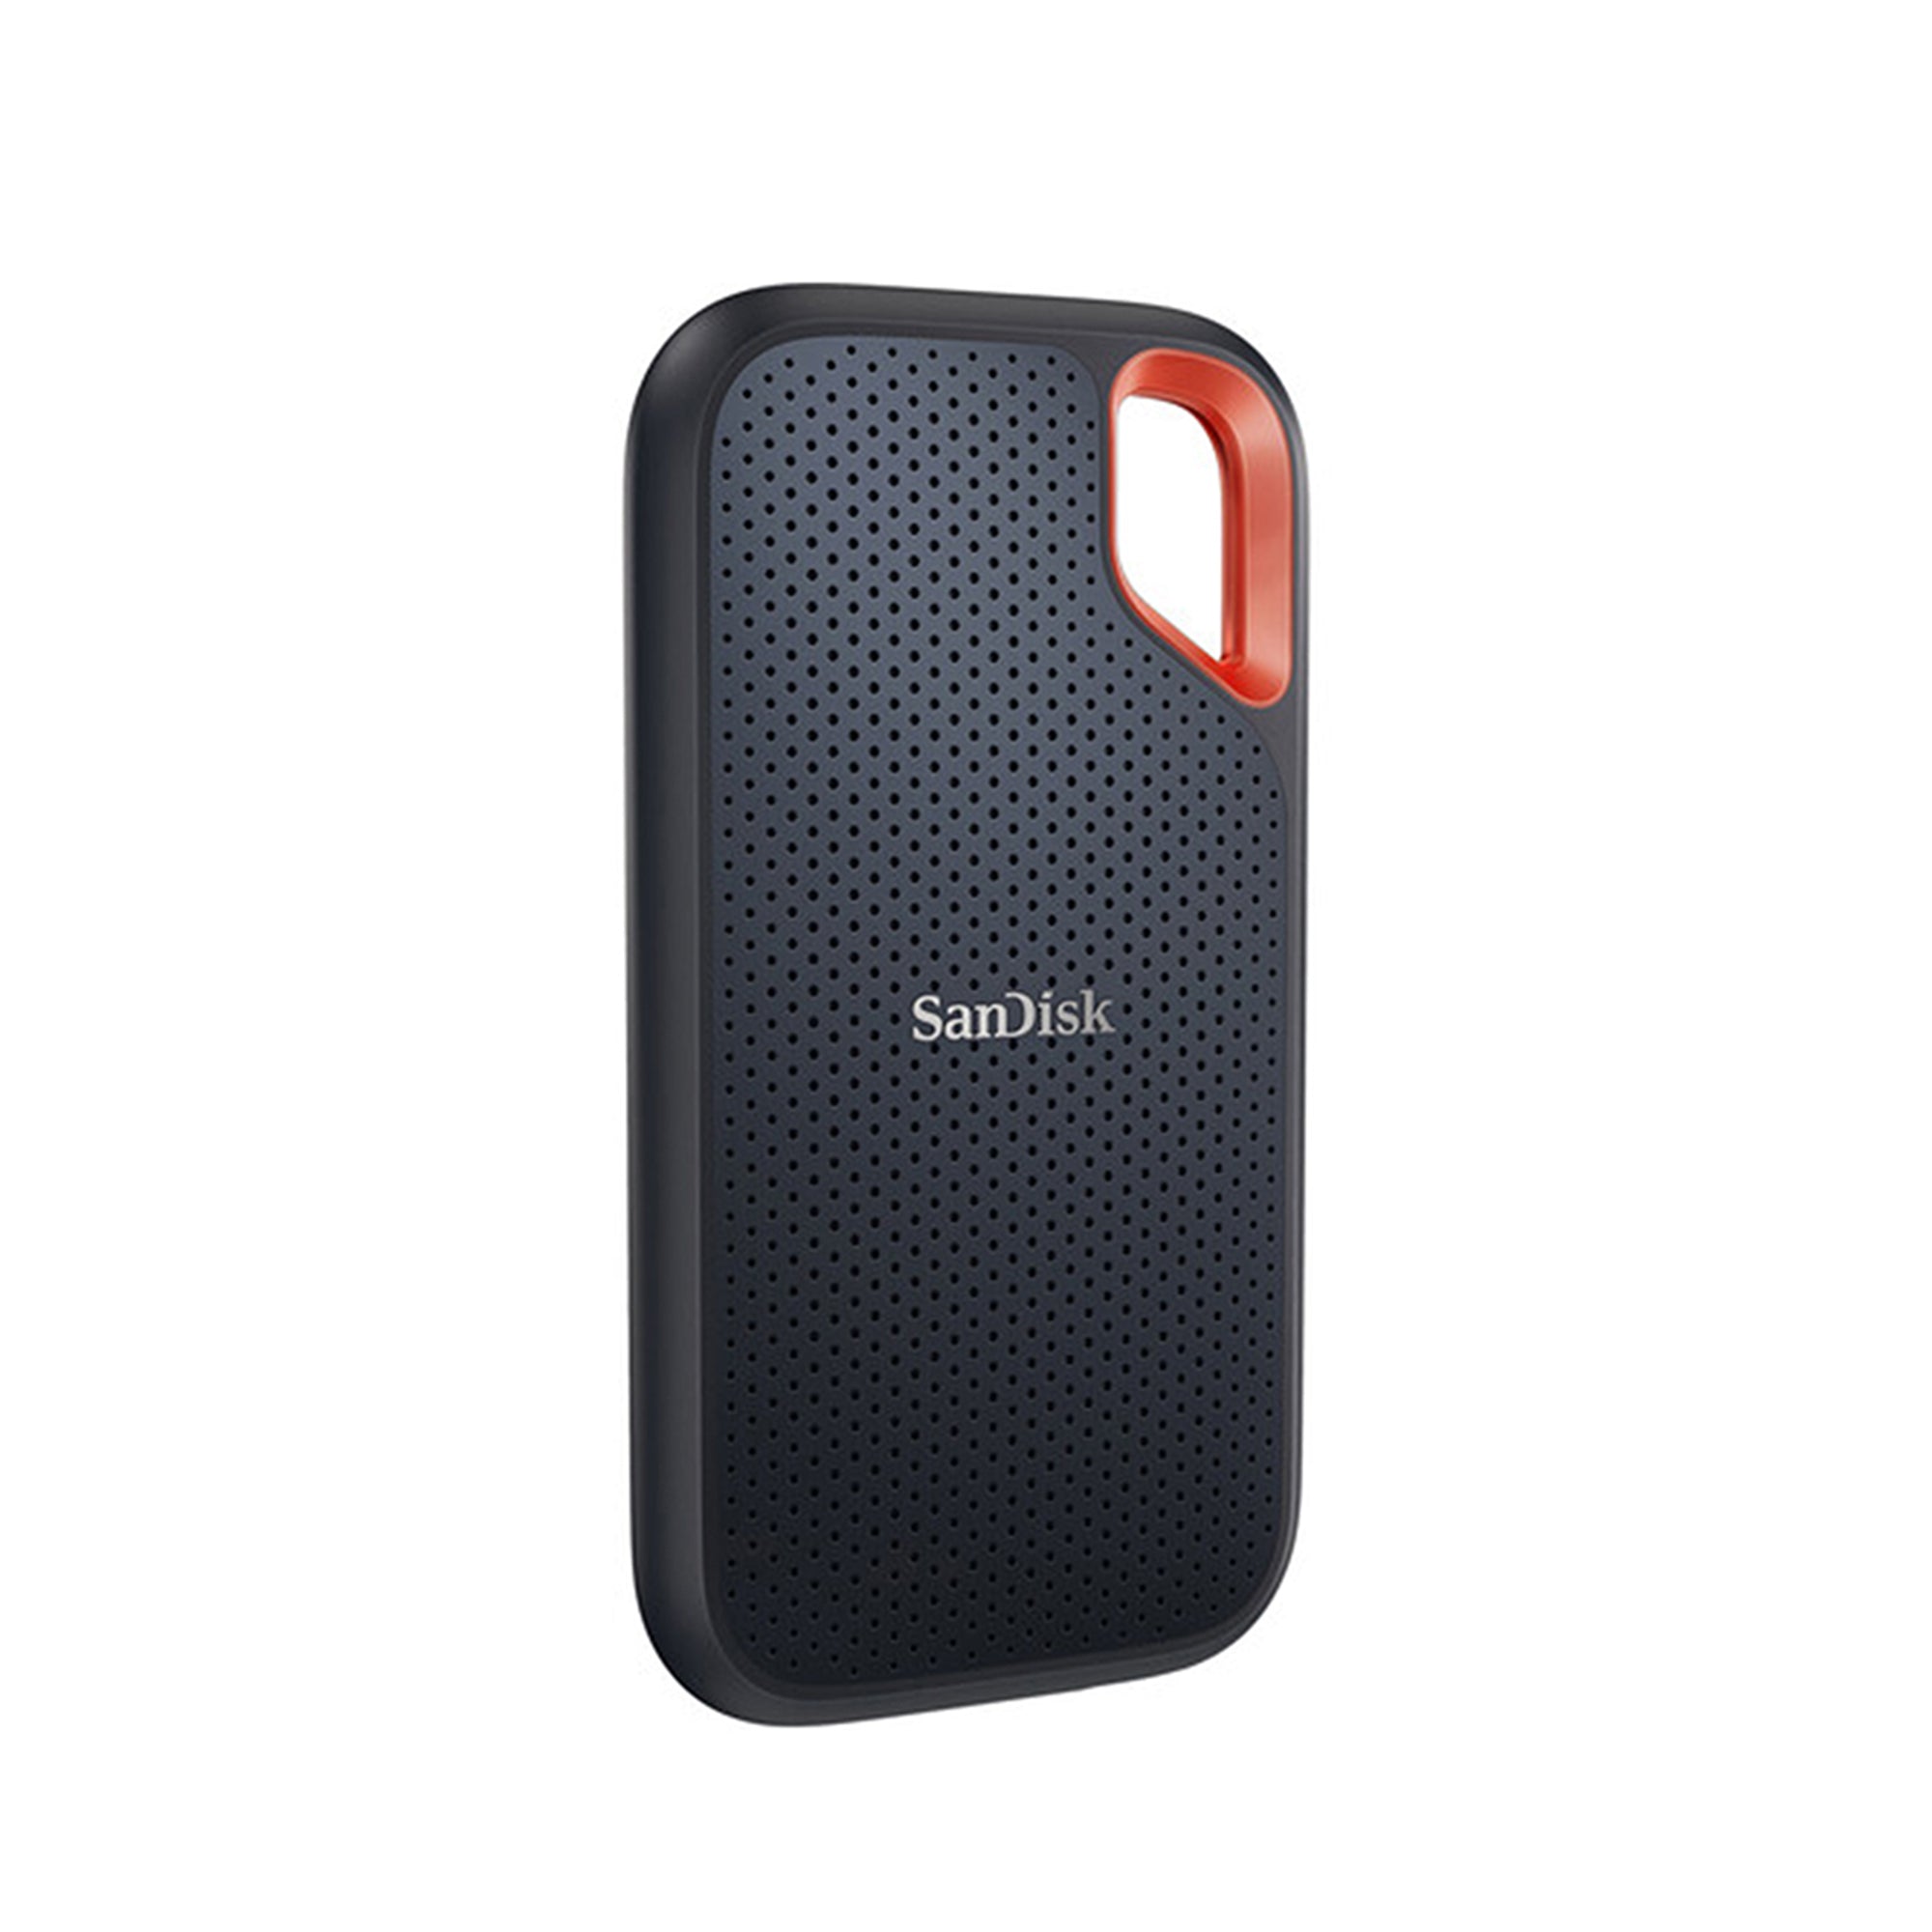 SanDisk Extreme Portable SSD 2TB V2 Up to 1050 MB/s Read Speed